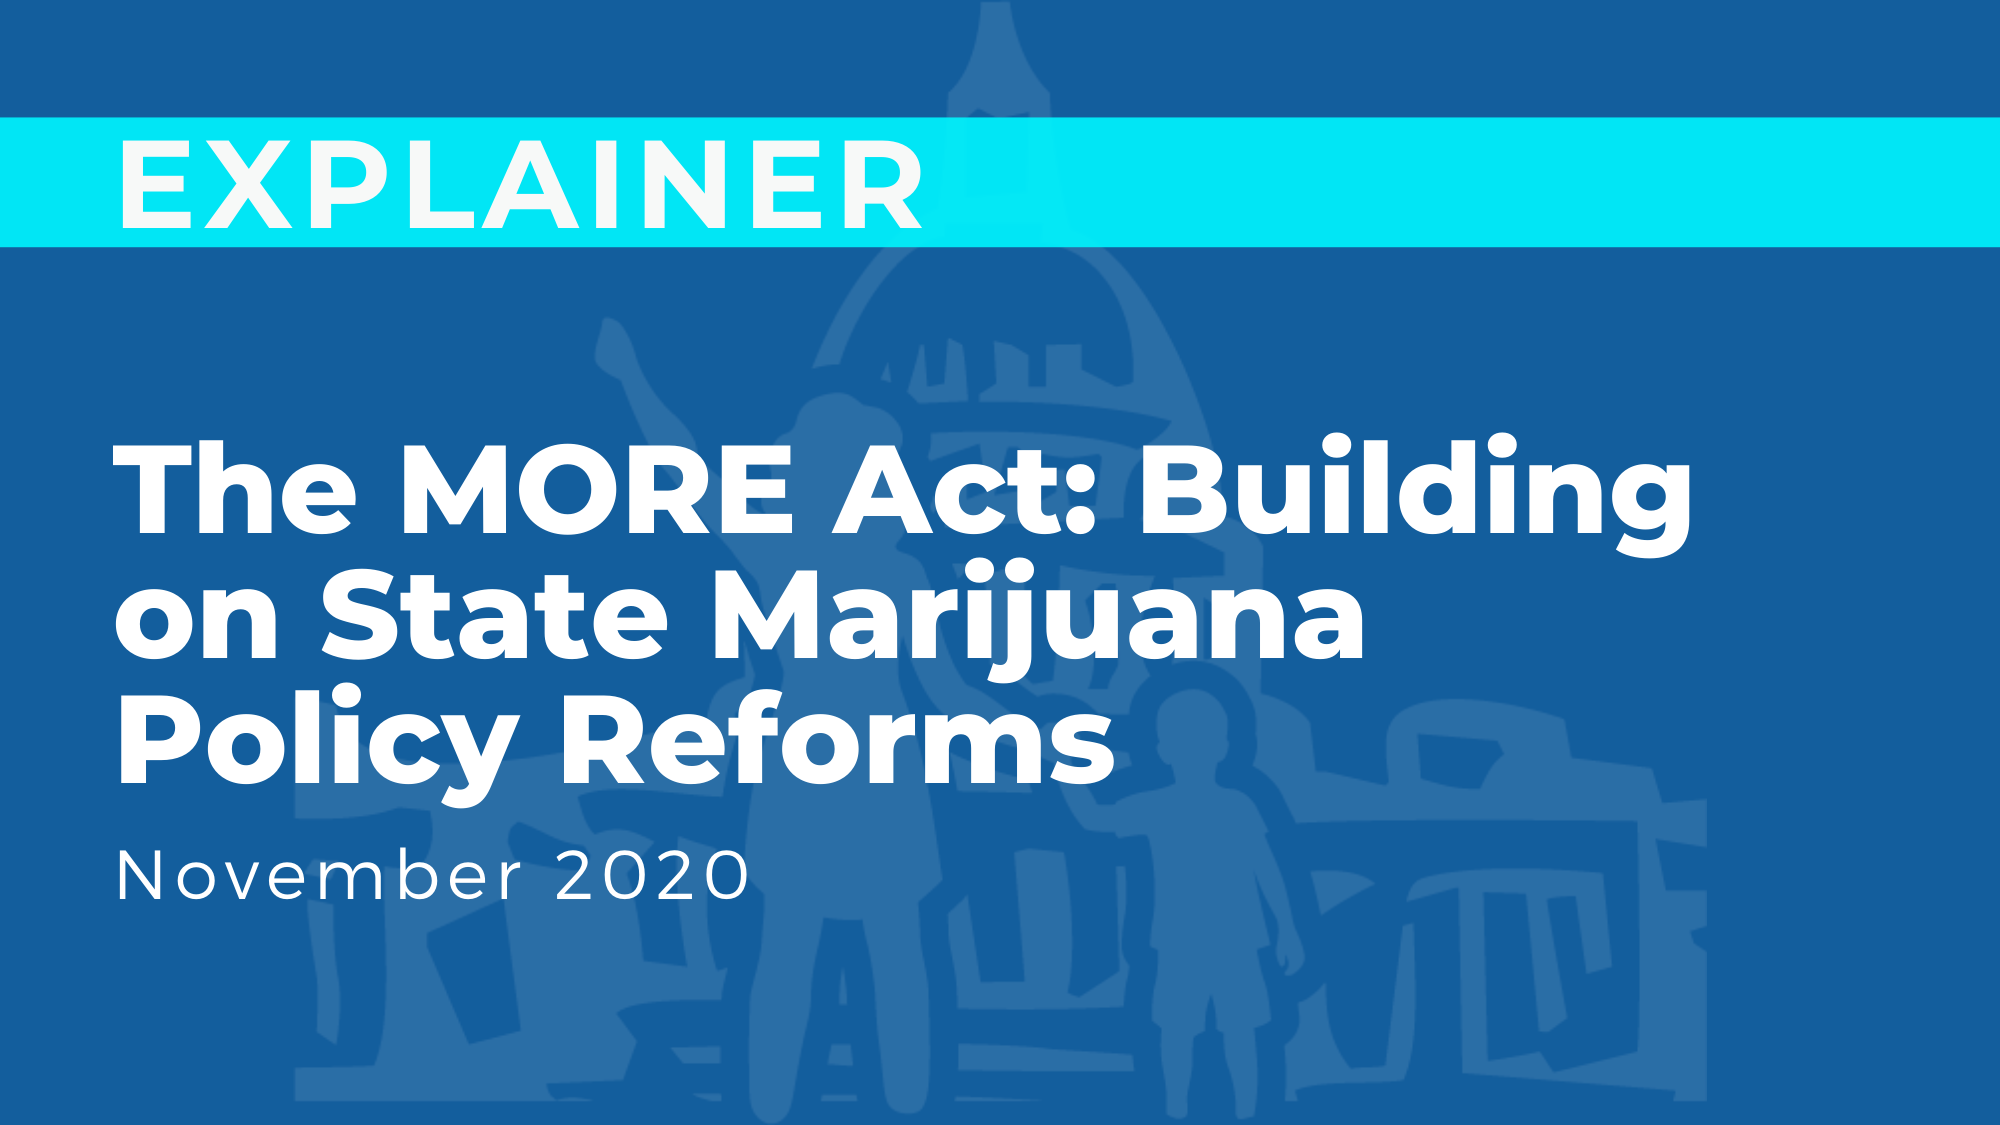 The MORE Act: Building on State Marijuana Policy Reforms